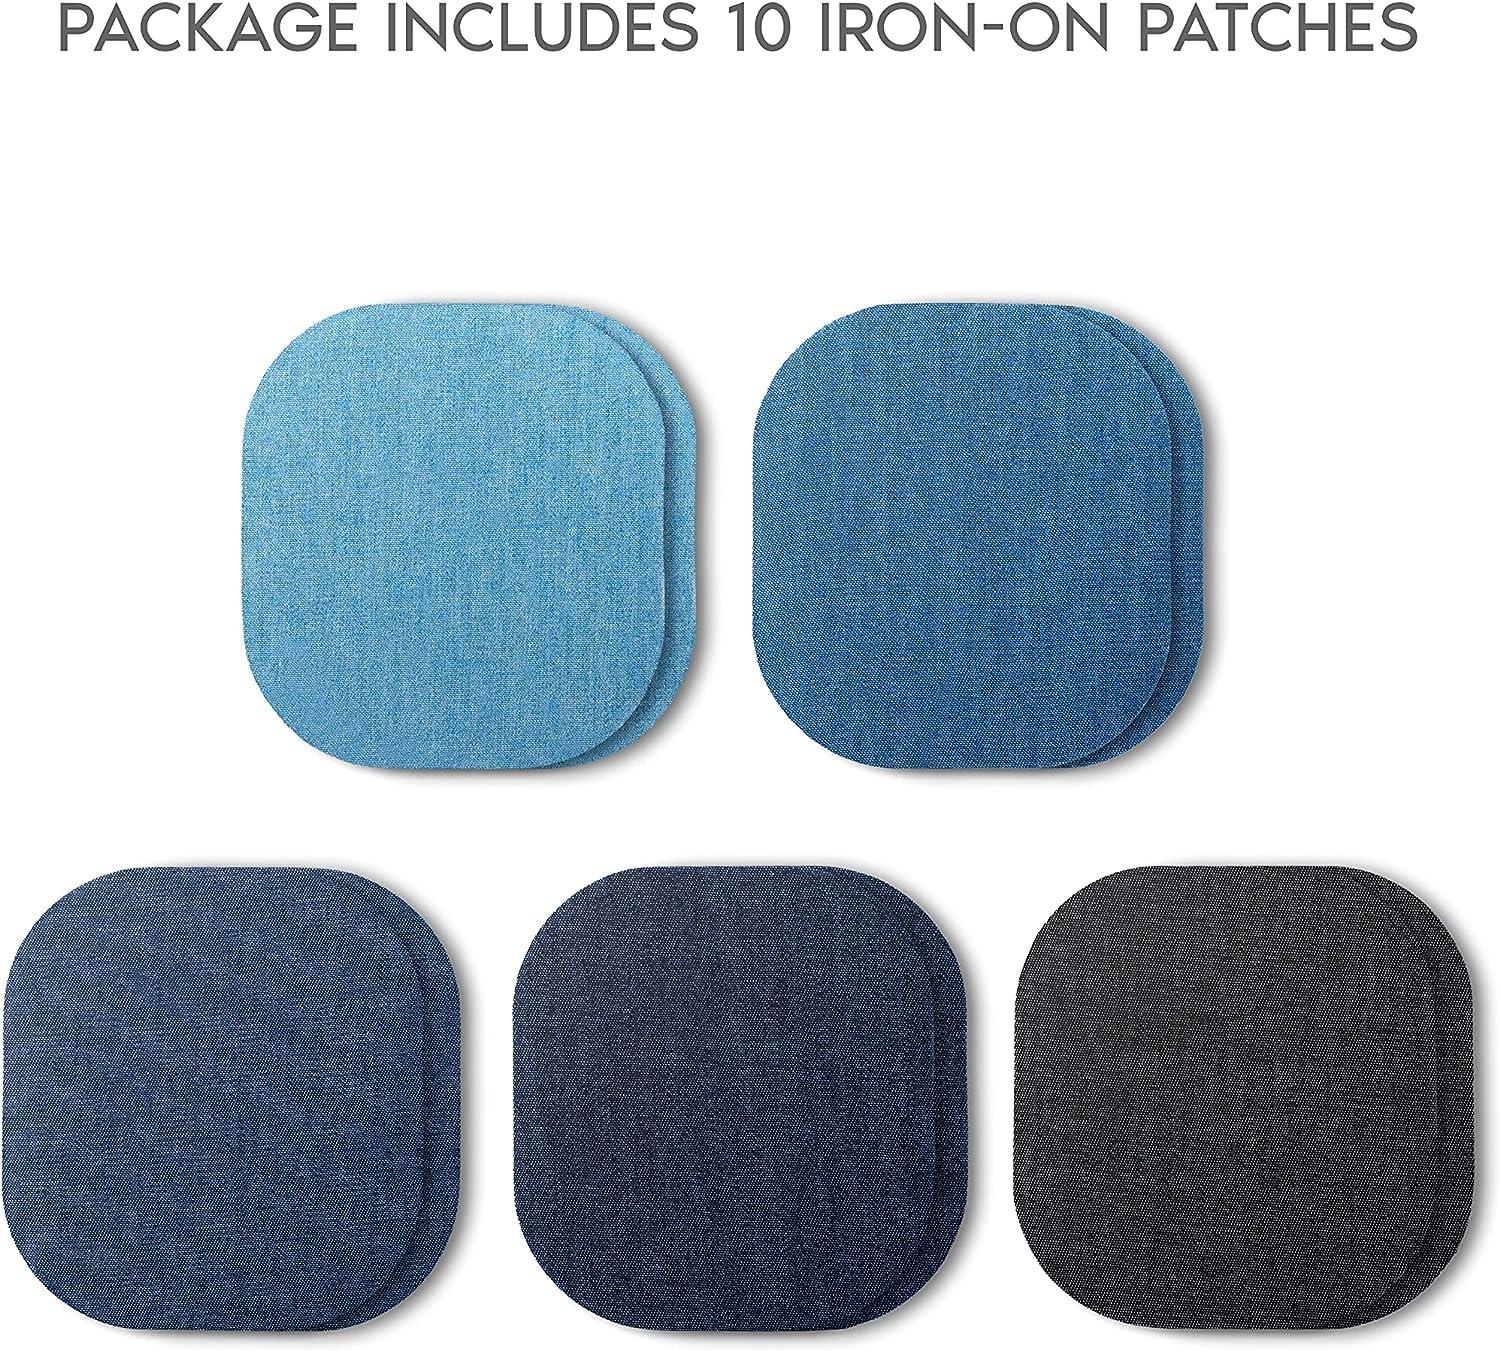 Fdelink Jeans Patch Denim Iron on Jean Patches Inside & Outside Strongest Glue Assorted Shades of Blue Repair Decorating 2.75 inch